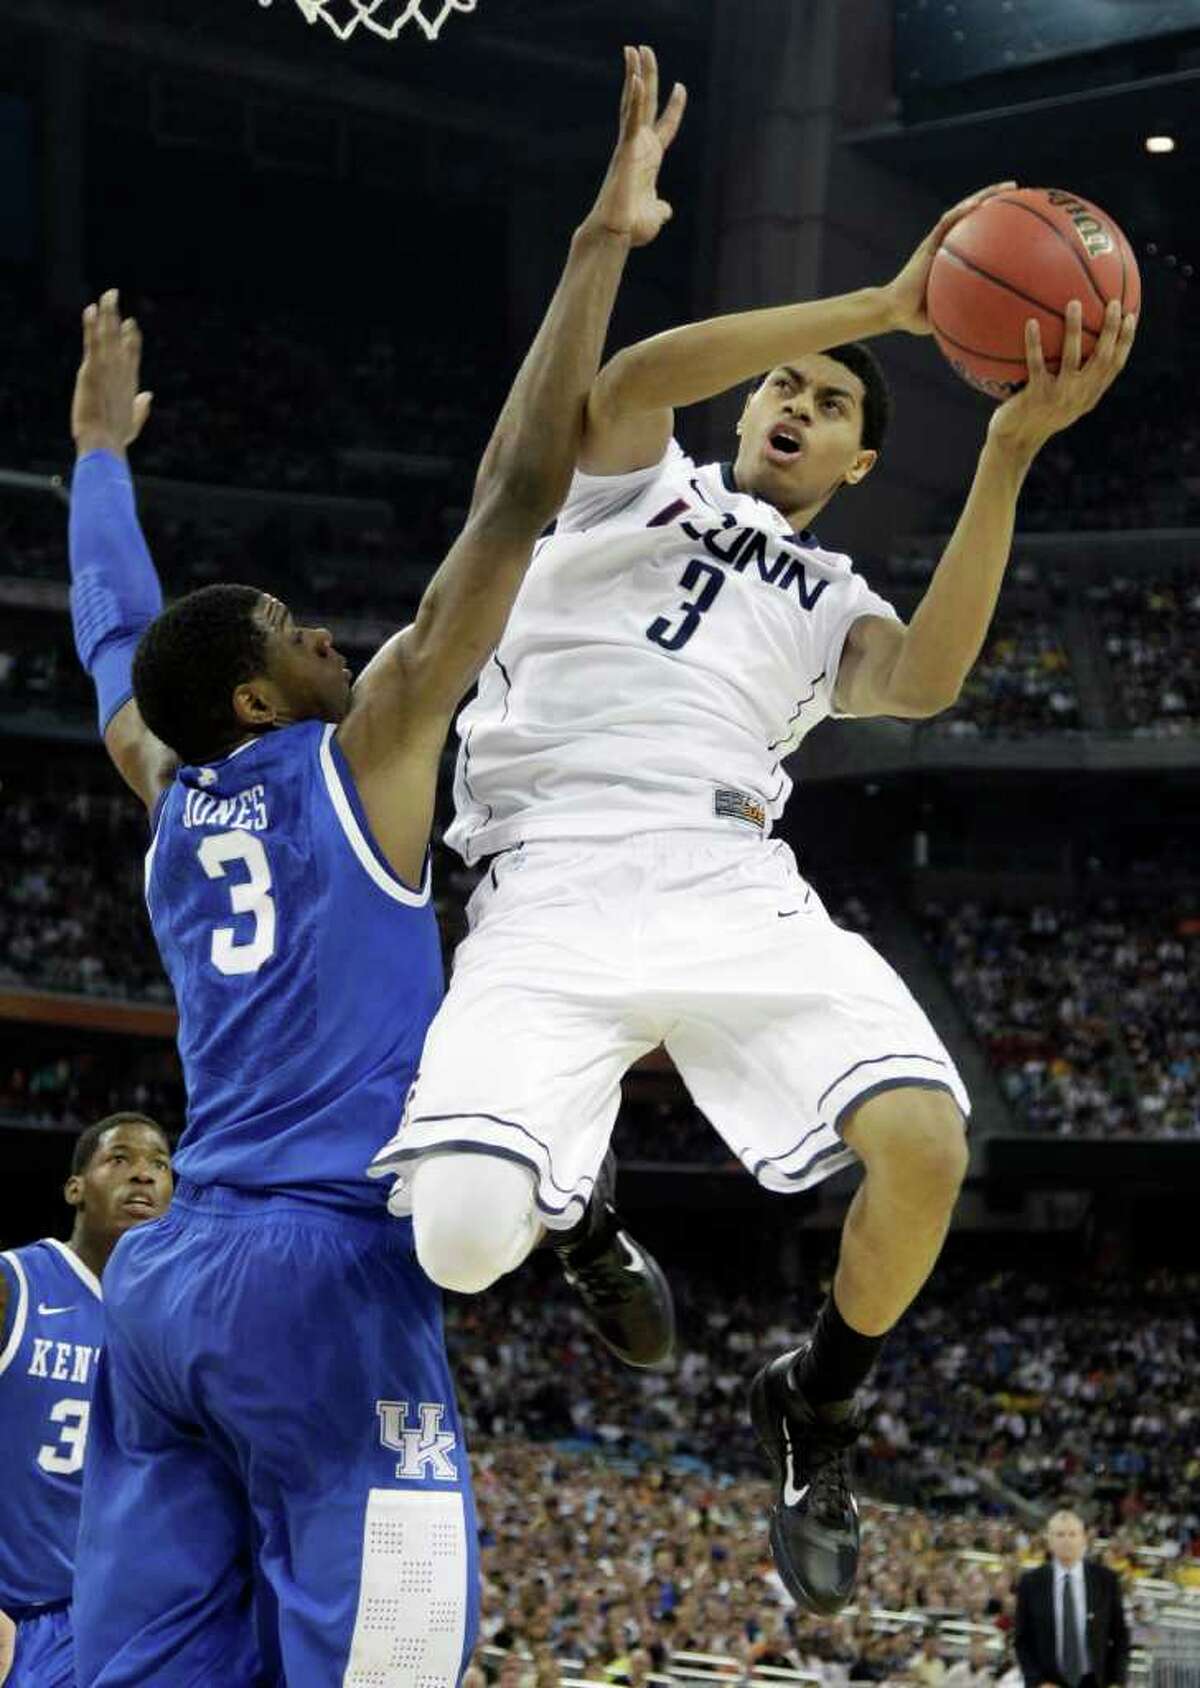 FIEL - In this April 2, 2011 file photo, Connecticut's Jeremy Lamb, right, looks to shoot over Kentucky's Terrence Jones, left, during the first half of a men's NCAA Final Four semifinal college basketball game, in Houston. Lamb was selected to The Associated Press' preseason All-American team this season. (AP Photo/David J. Phillip, File)